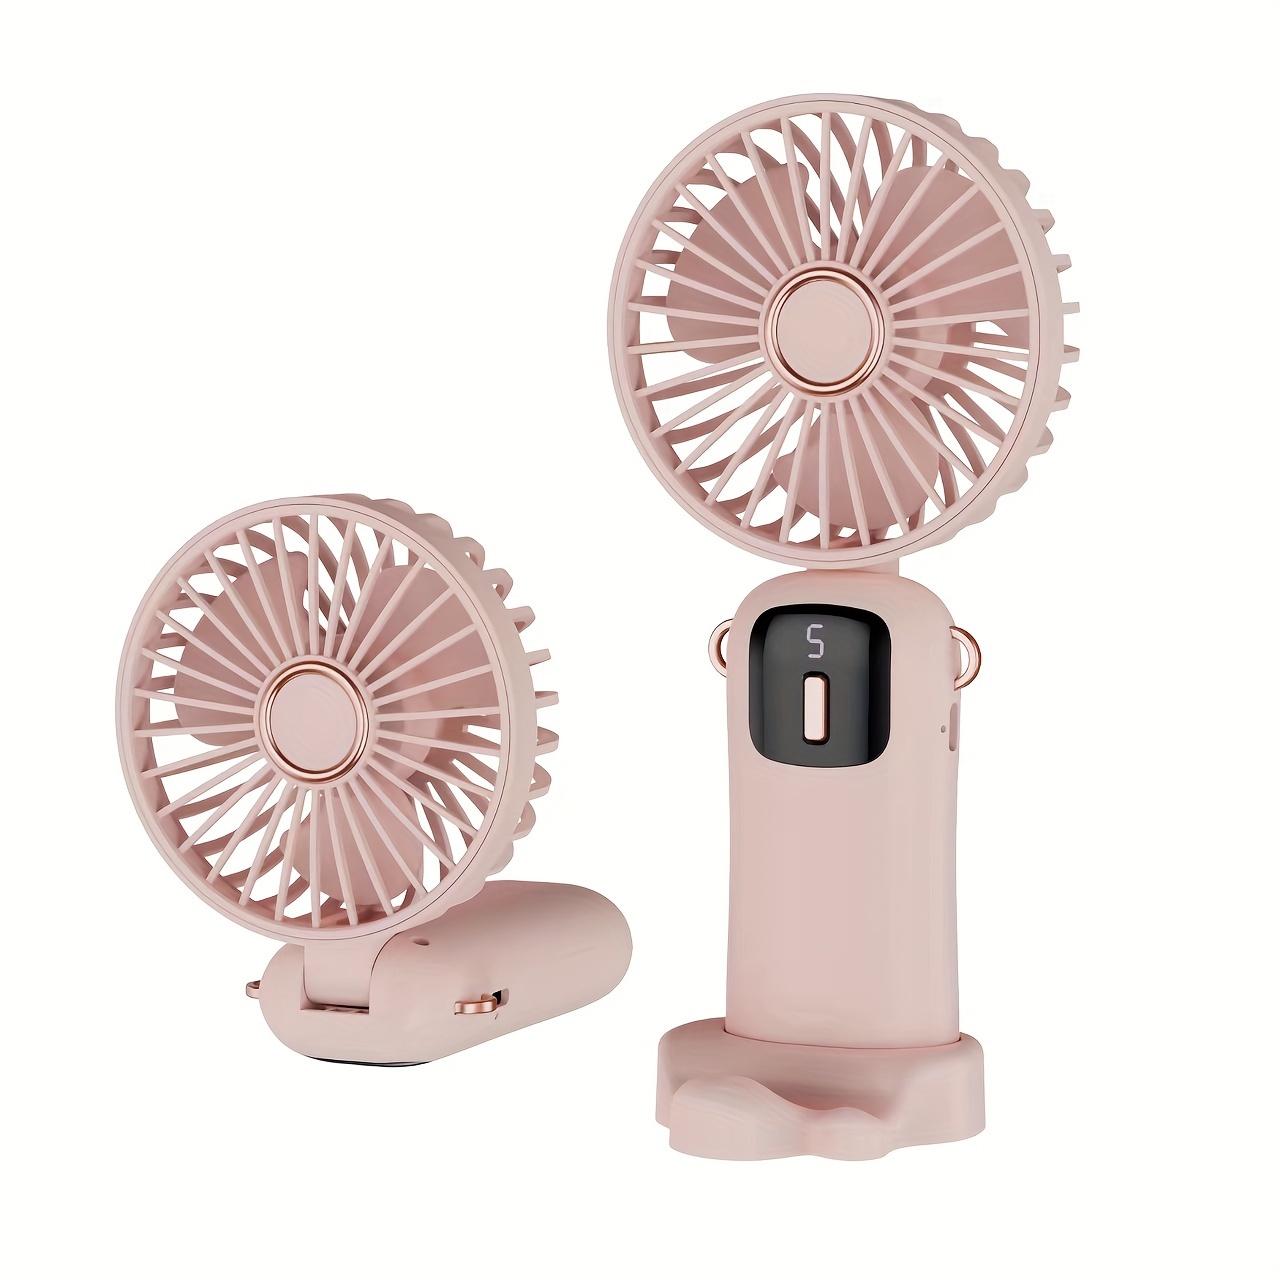 

Portable Mini Usb Fan With Rechargeable Battery, 5-speed, 90° Foldable Handheld And Desktop Design, Led Display, Touch Control, Indoor/outdoor Use